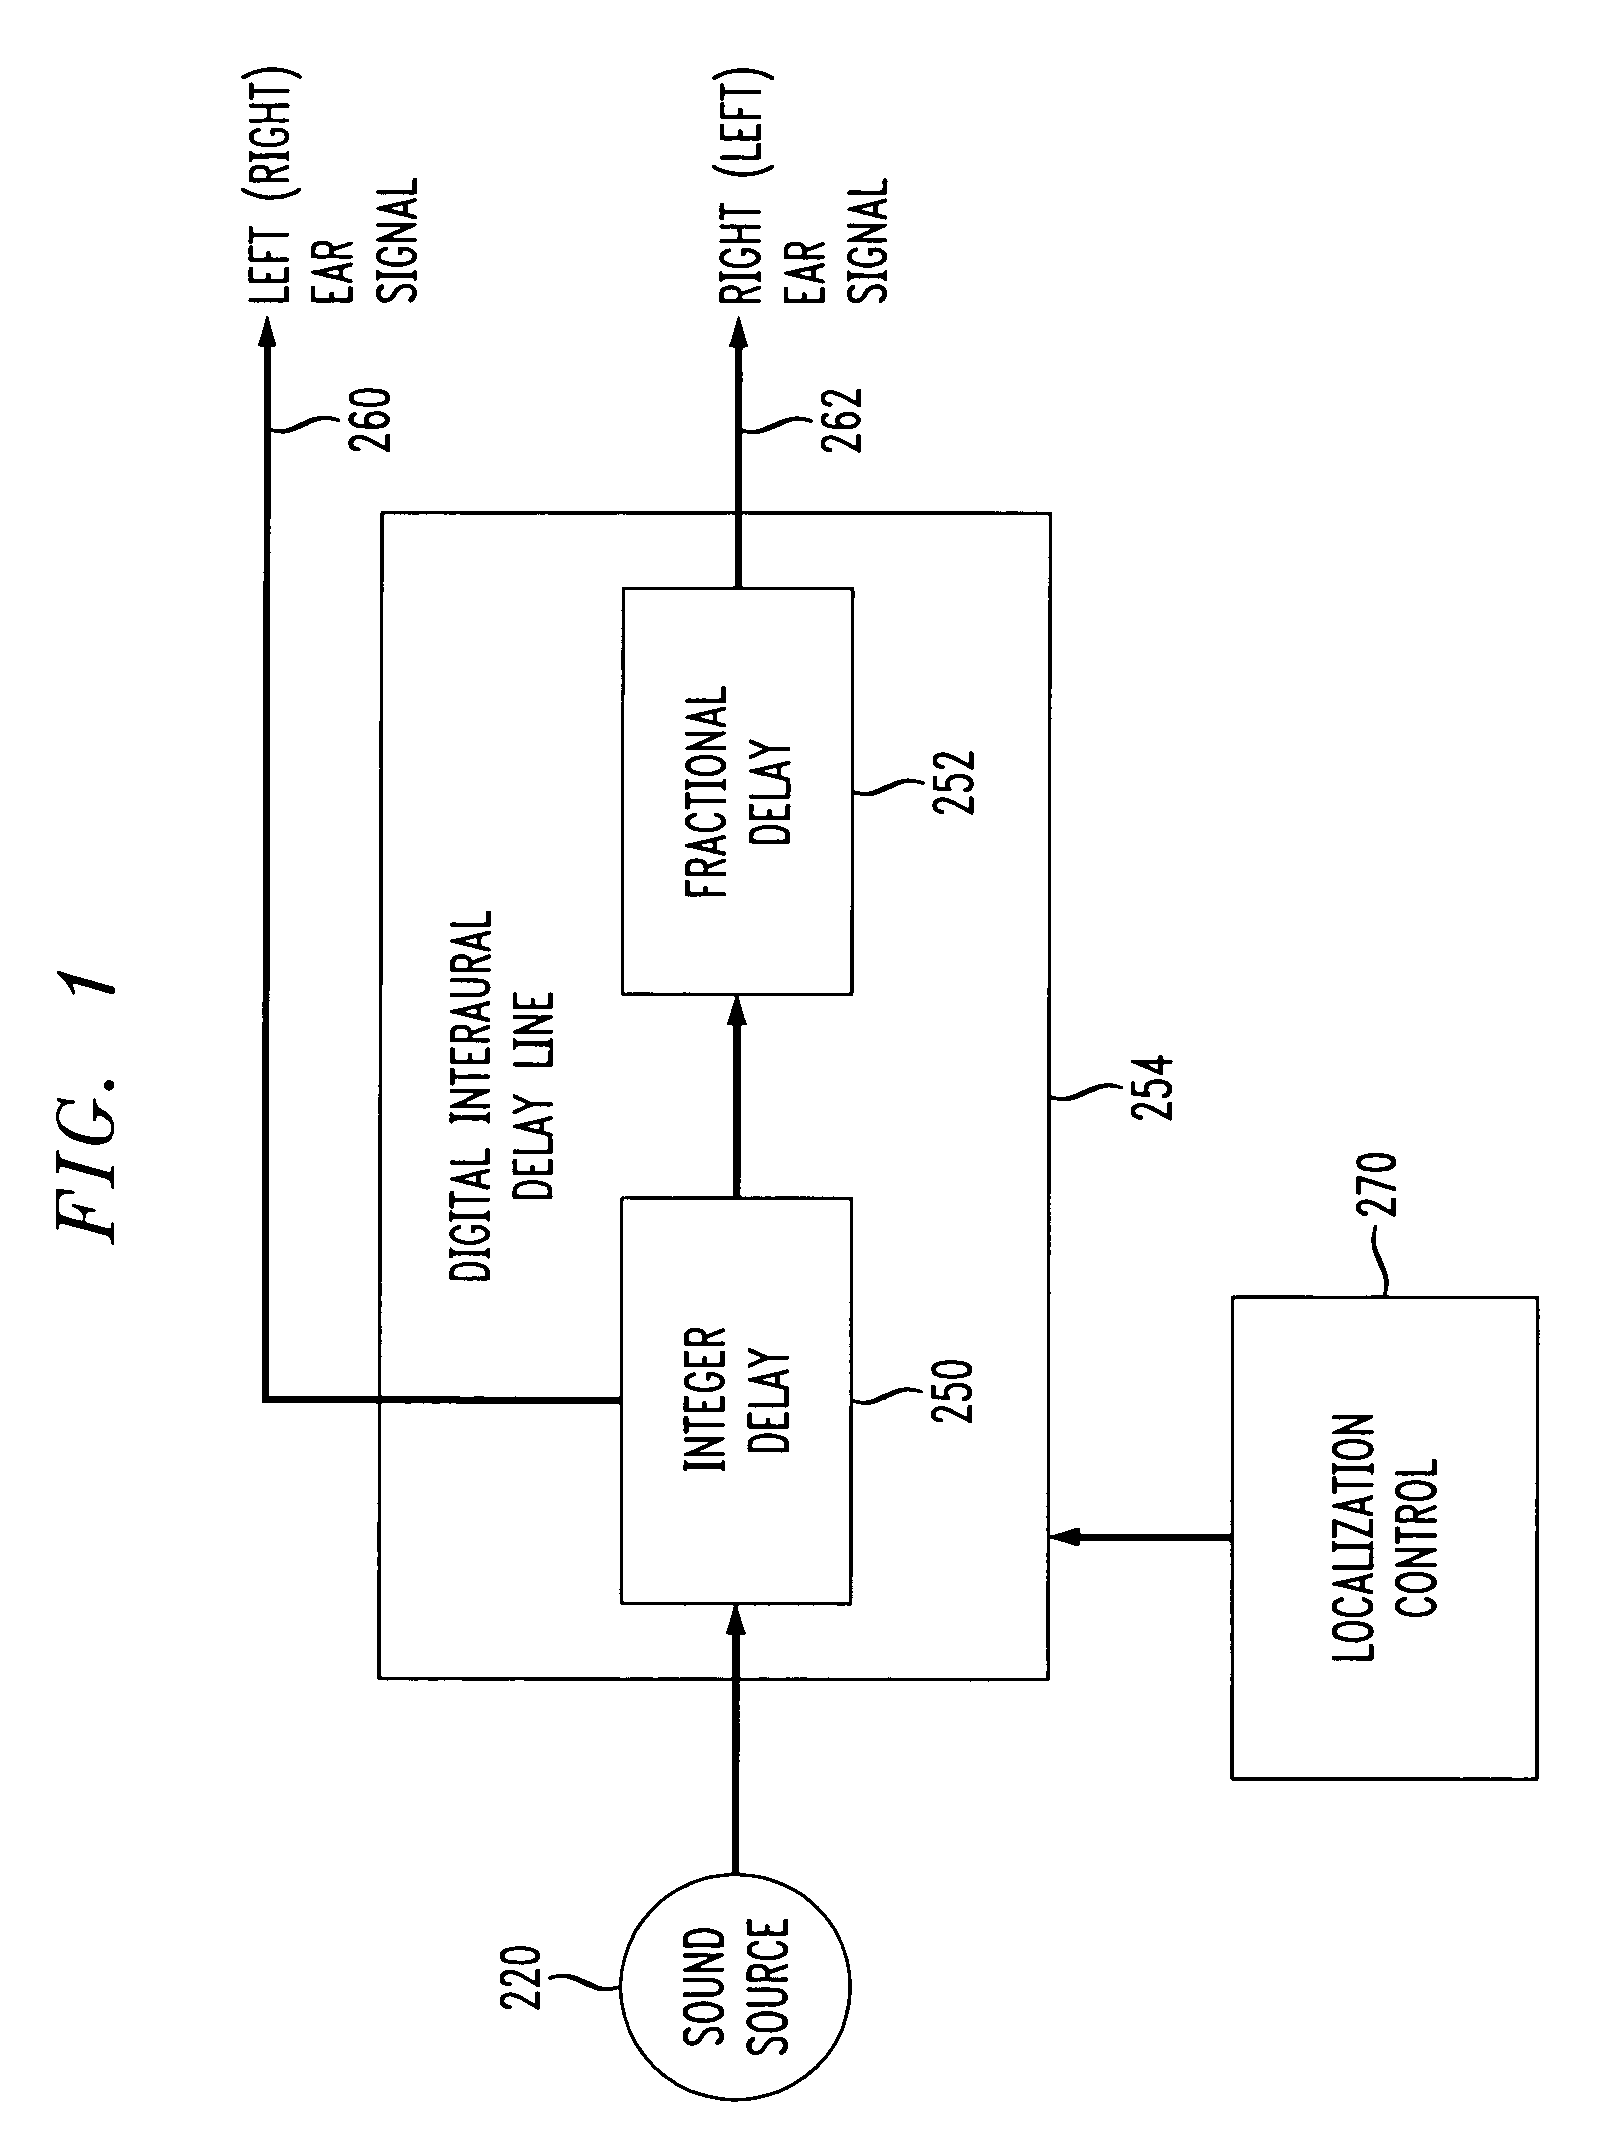 Method and apparatus for processing interaural time delay in 3D digital audio